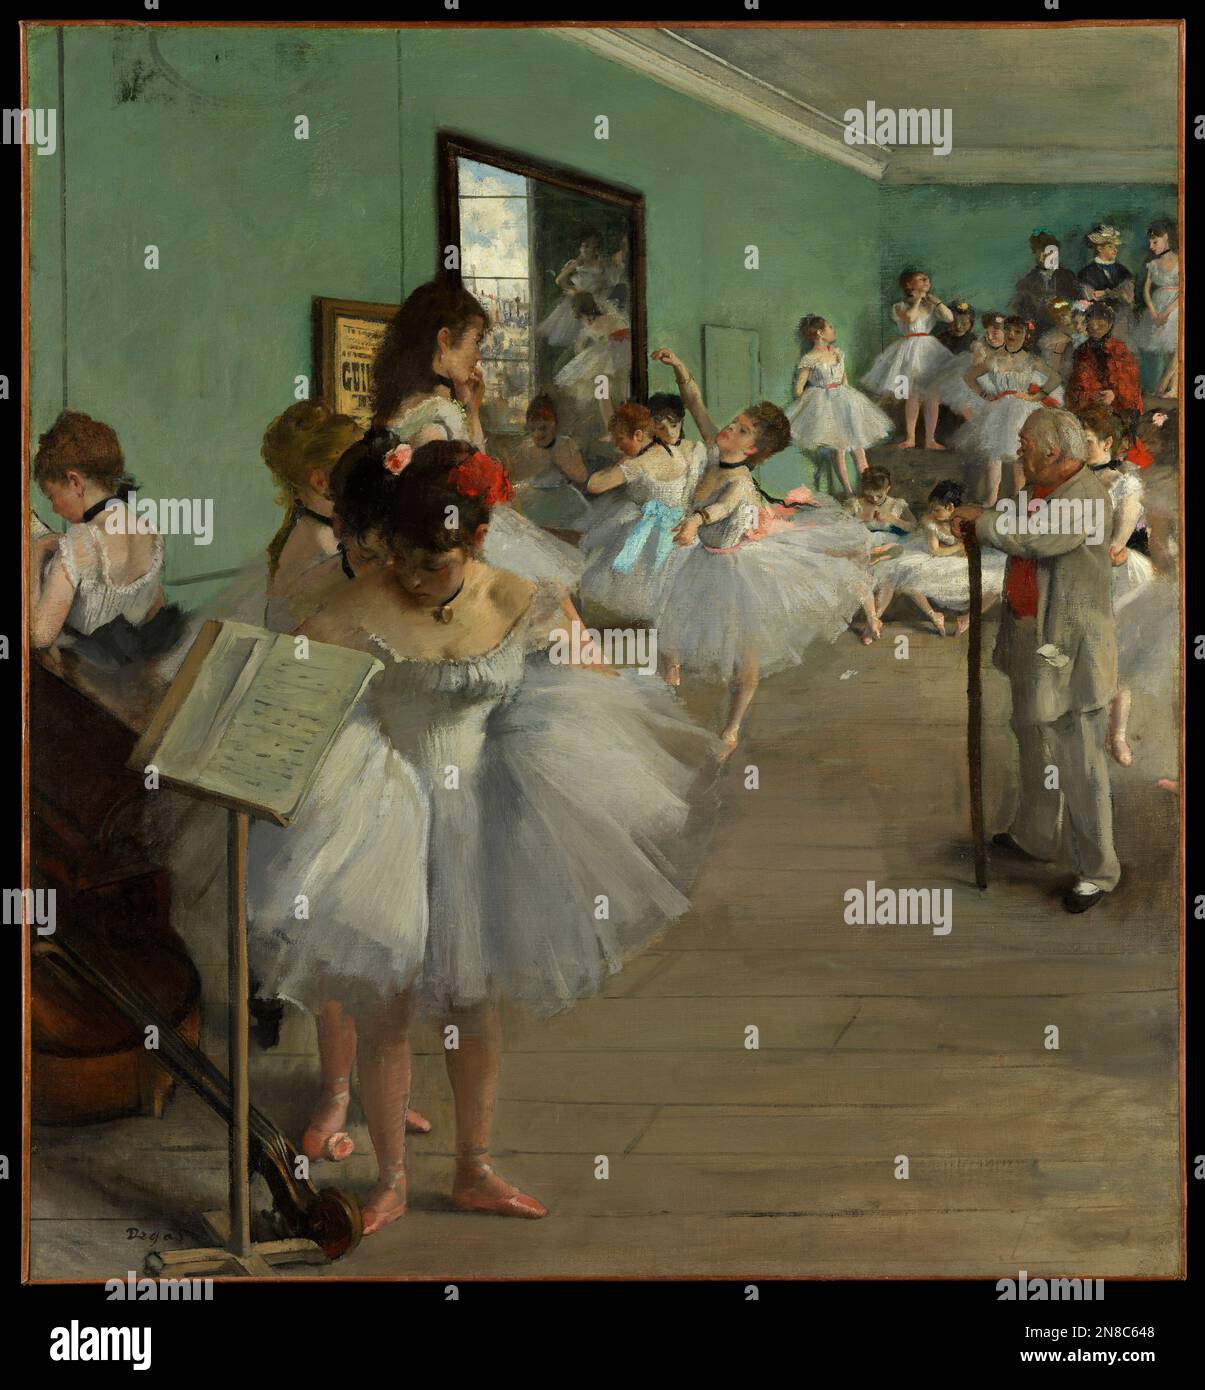 The Dance Class. Edgar Degas. 1874.  The class is being conducted by the famous ballet master, Jules Perrot. Stock Photo